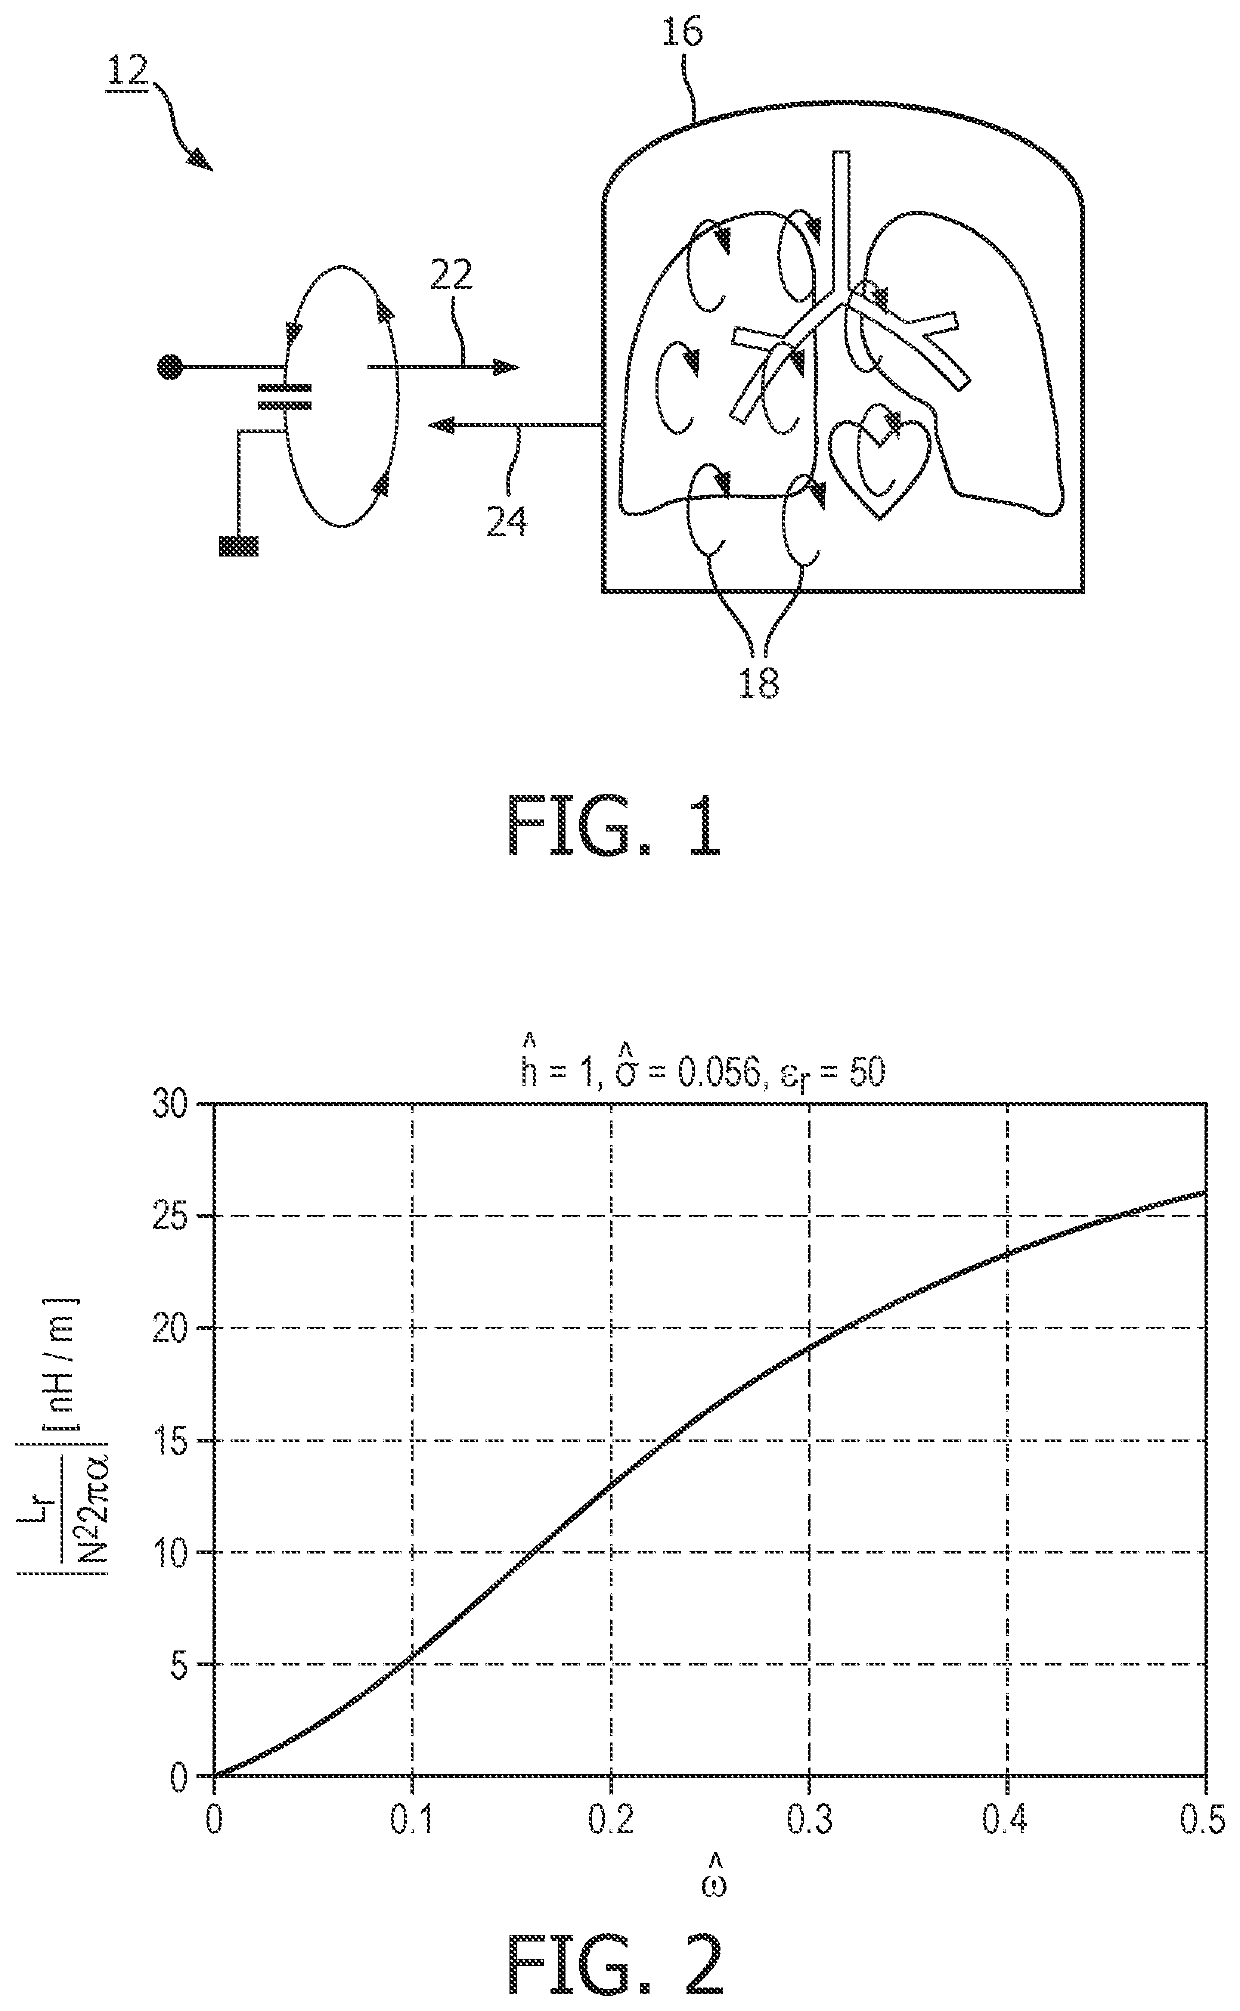 Inductive sensing system for sensing electromagnetic signals from a body